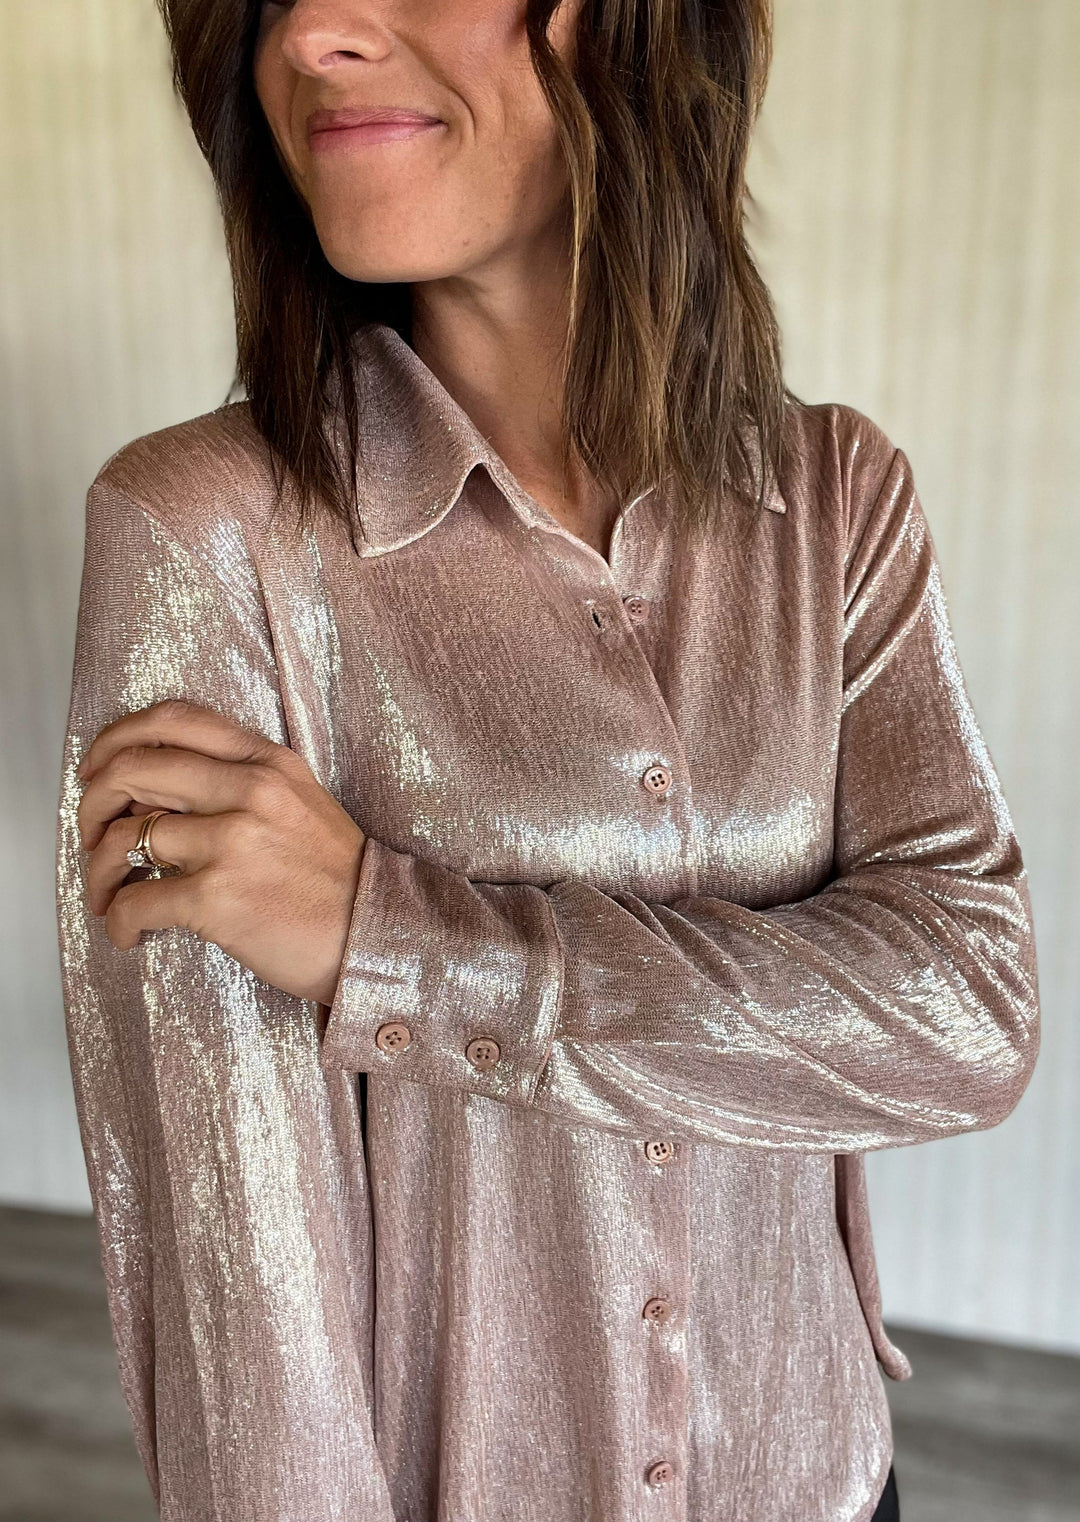 Blush Foil Coated Blouse - perfect tops for New Years Eve (Skies Are blue)